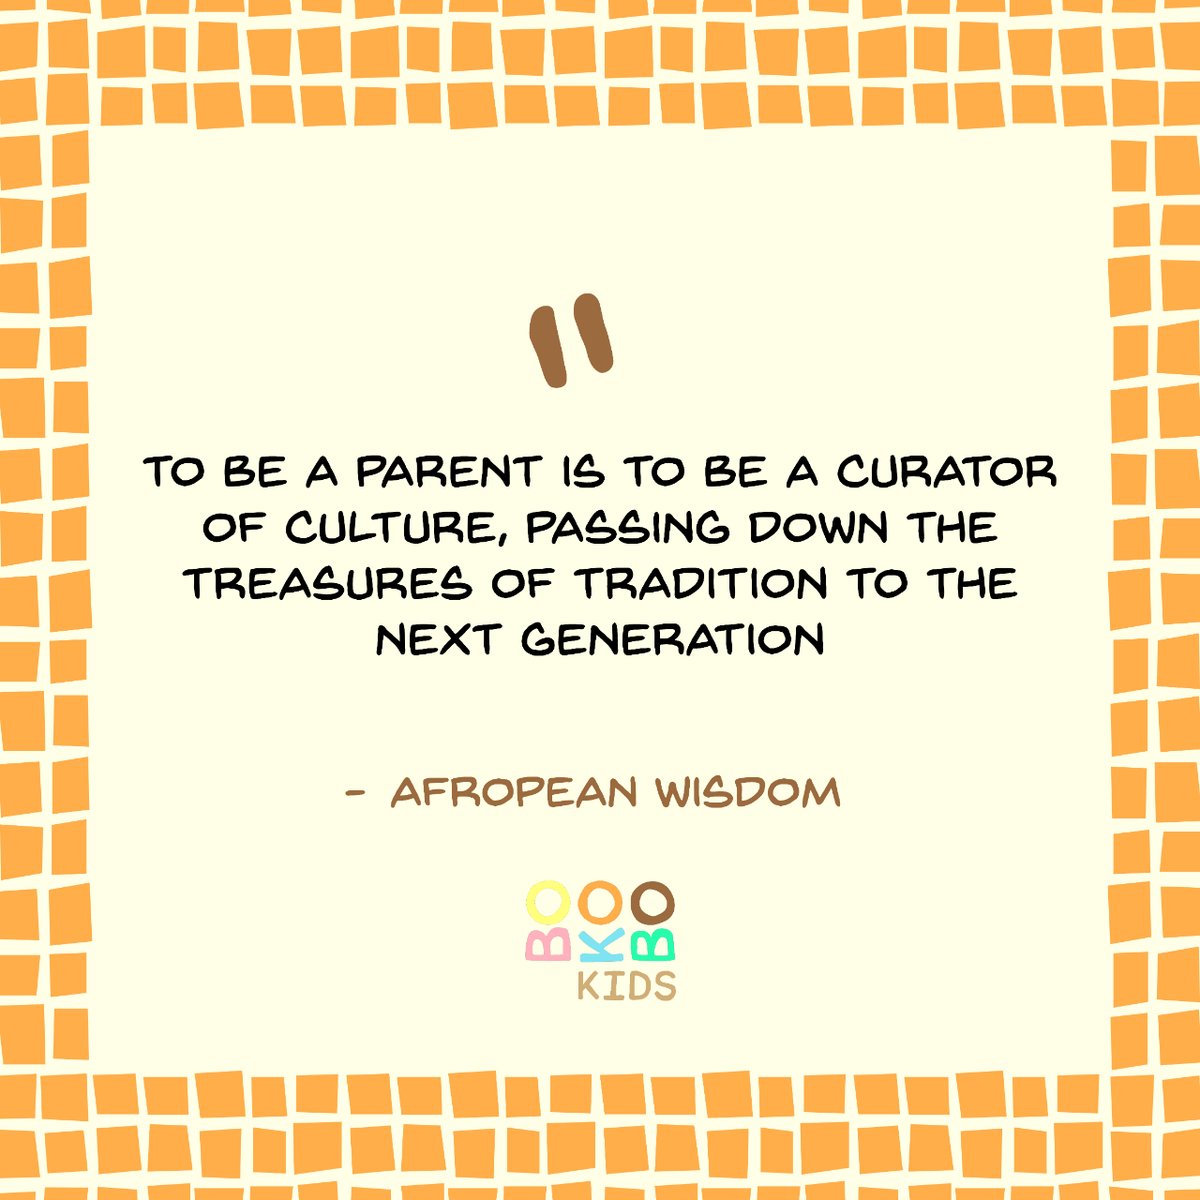 To be a Parent is to be a curator of culture...

#bokobokids #africanwisdom #ancientwisdom #africanstory #blackkids #mondaymotivation